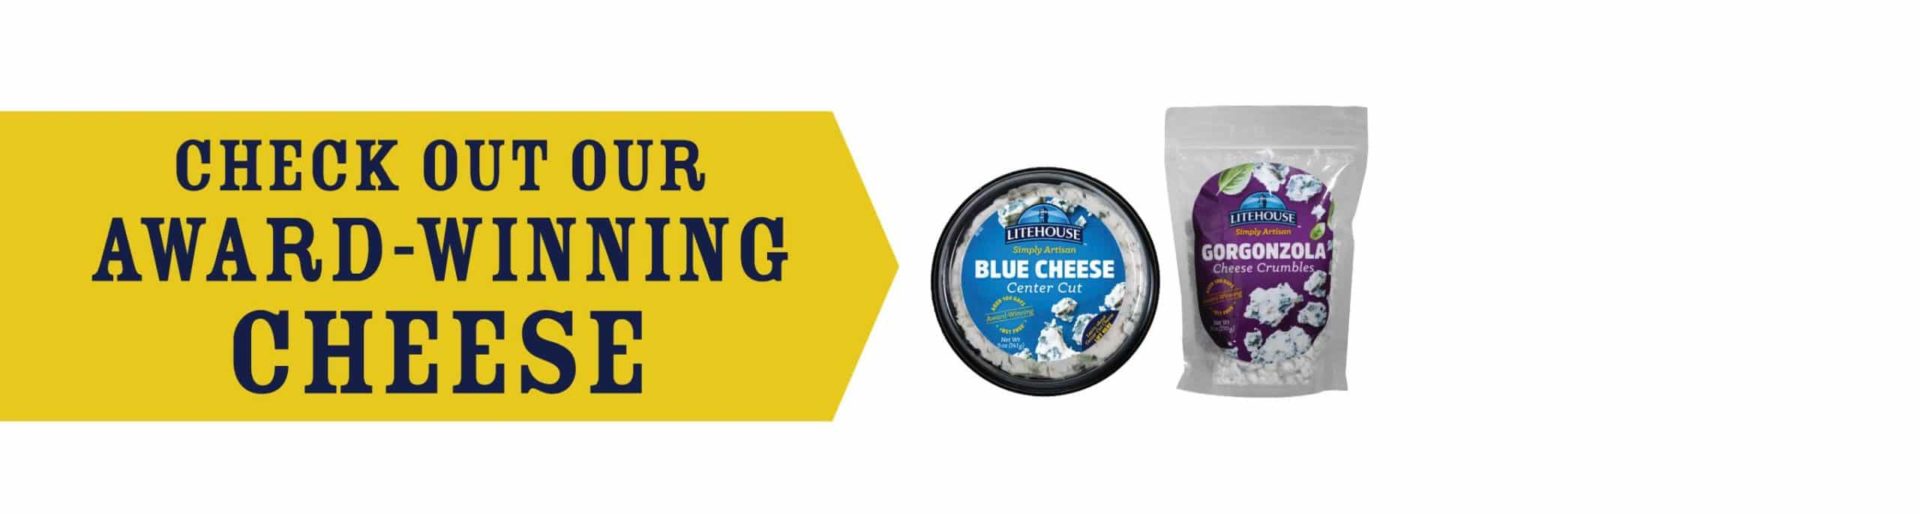 CHECK OUT OUR AWARD-WINNING CHEESE